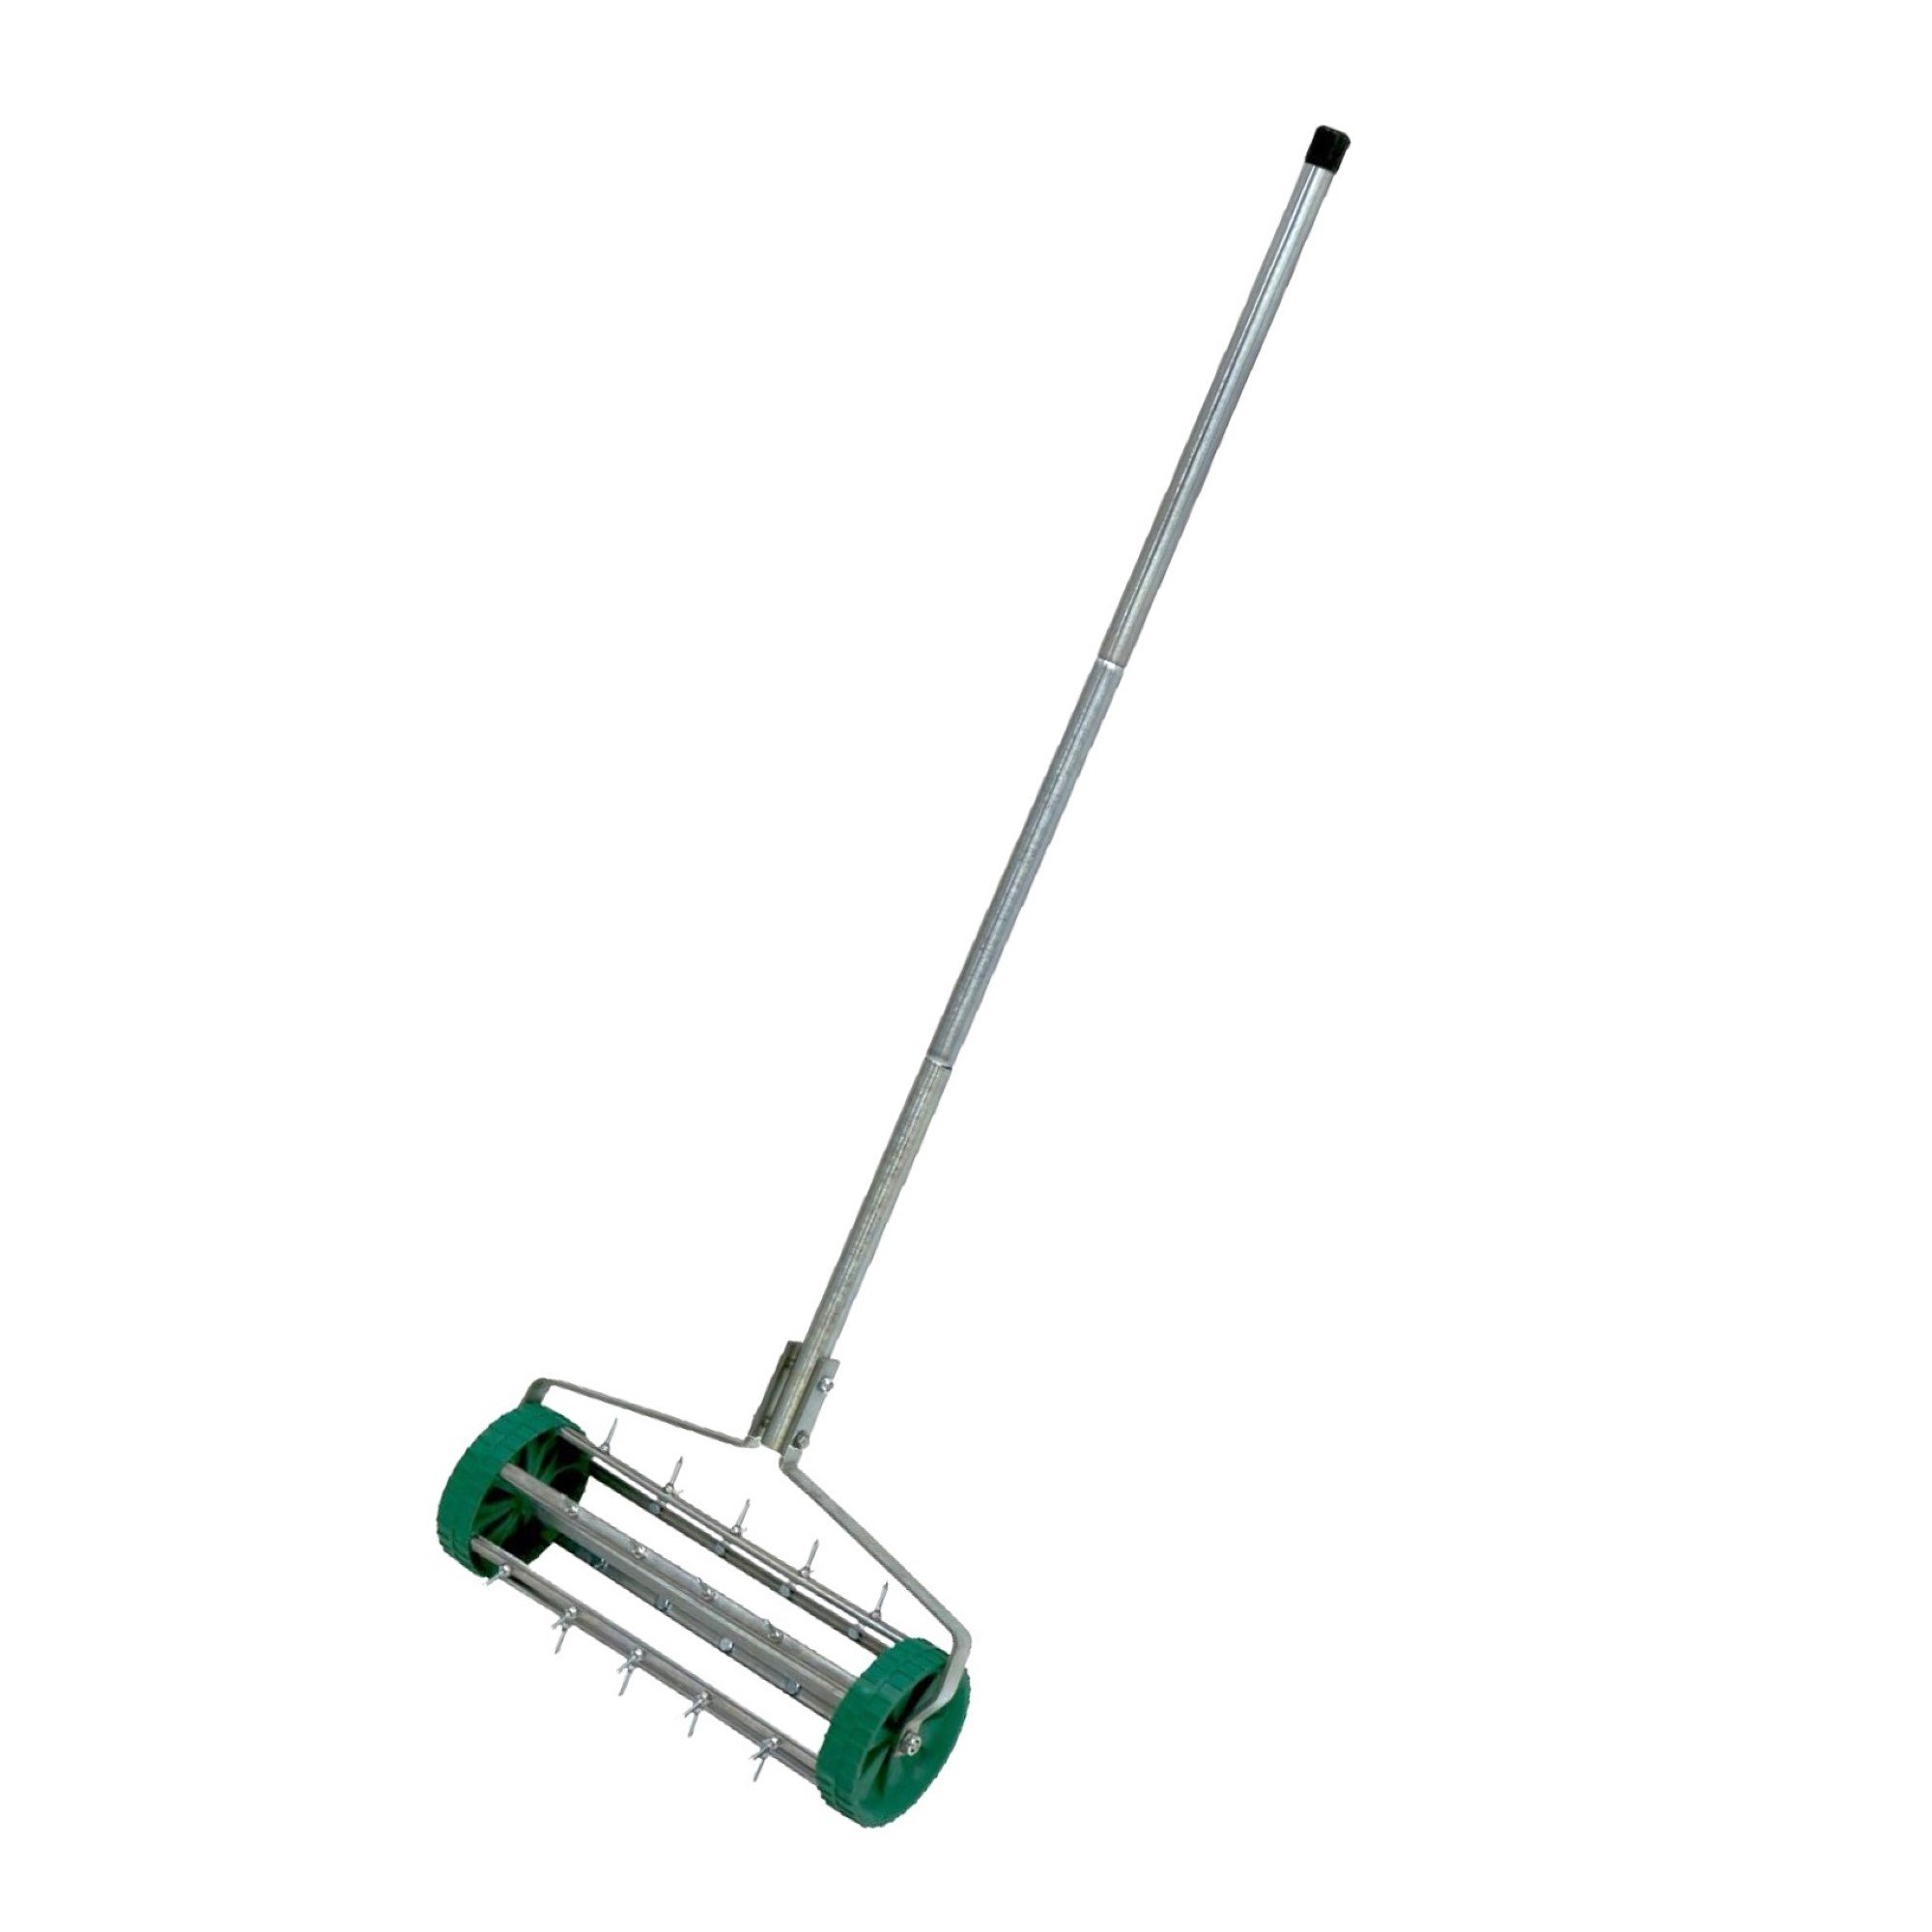 Heavy Duty Garden Lawn Aerator - c/w Spikes - Click Image to Close